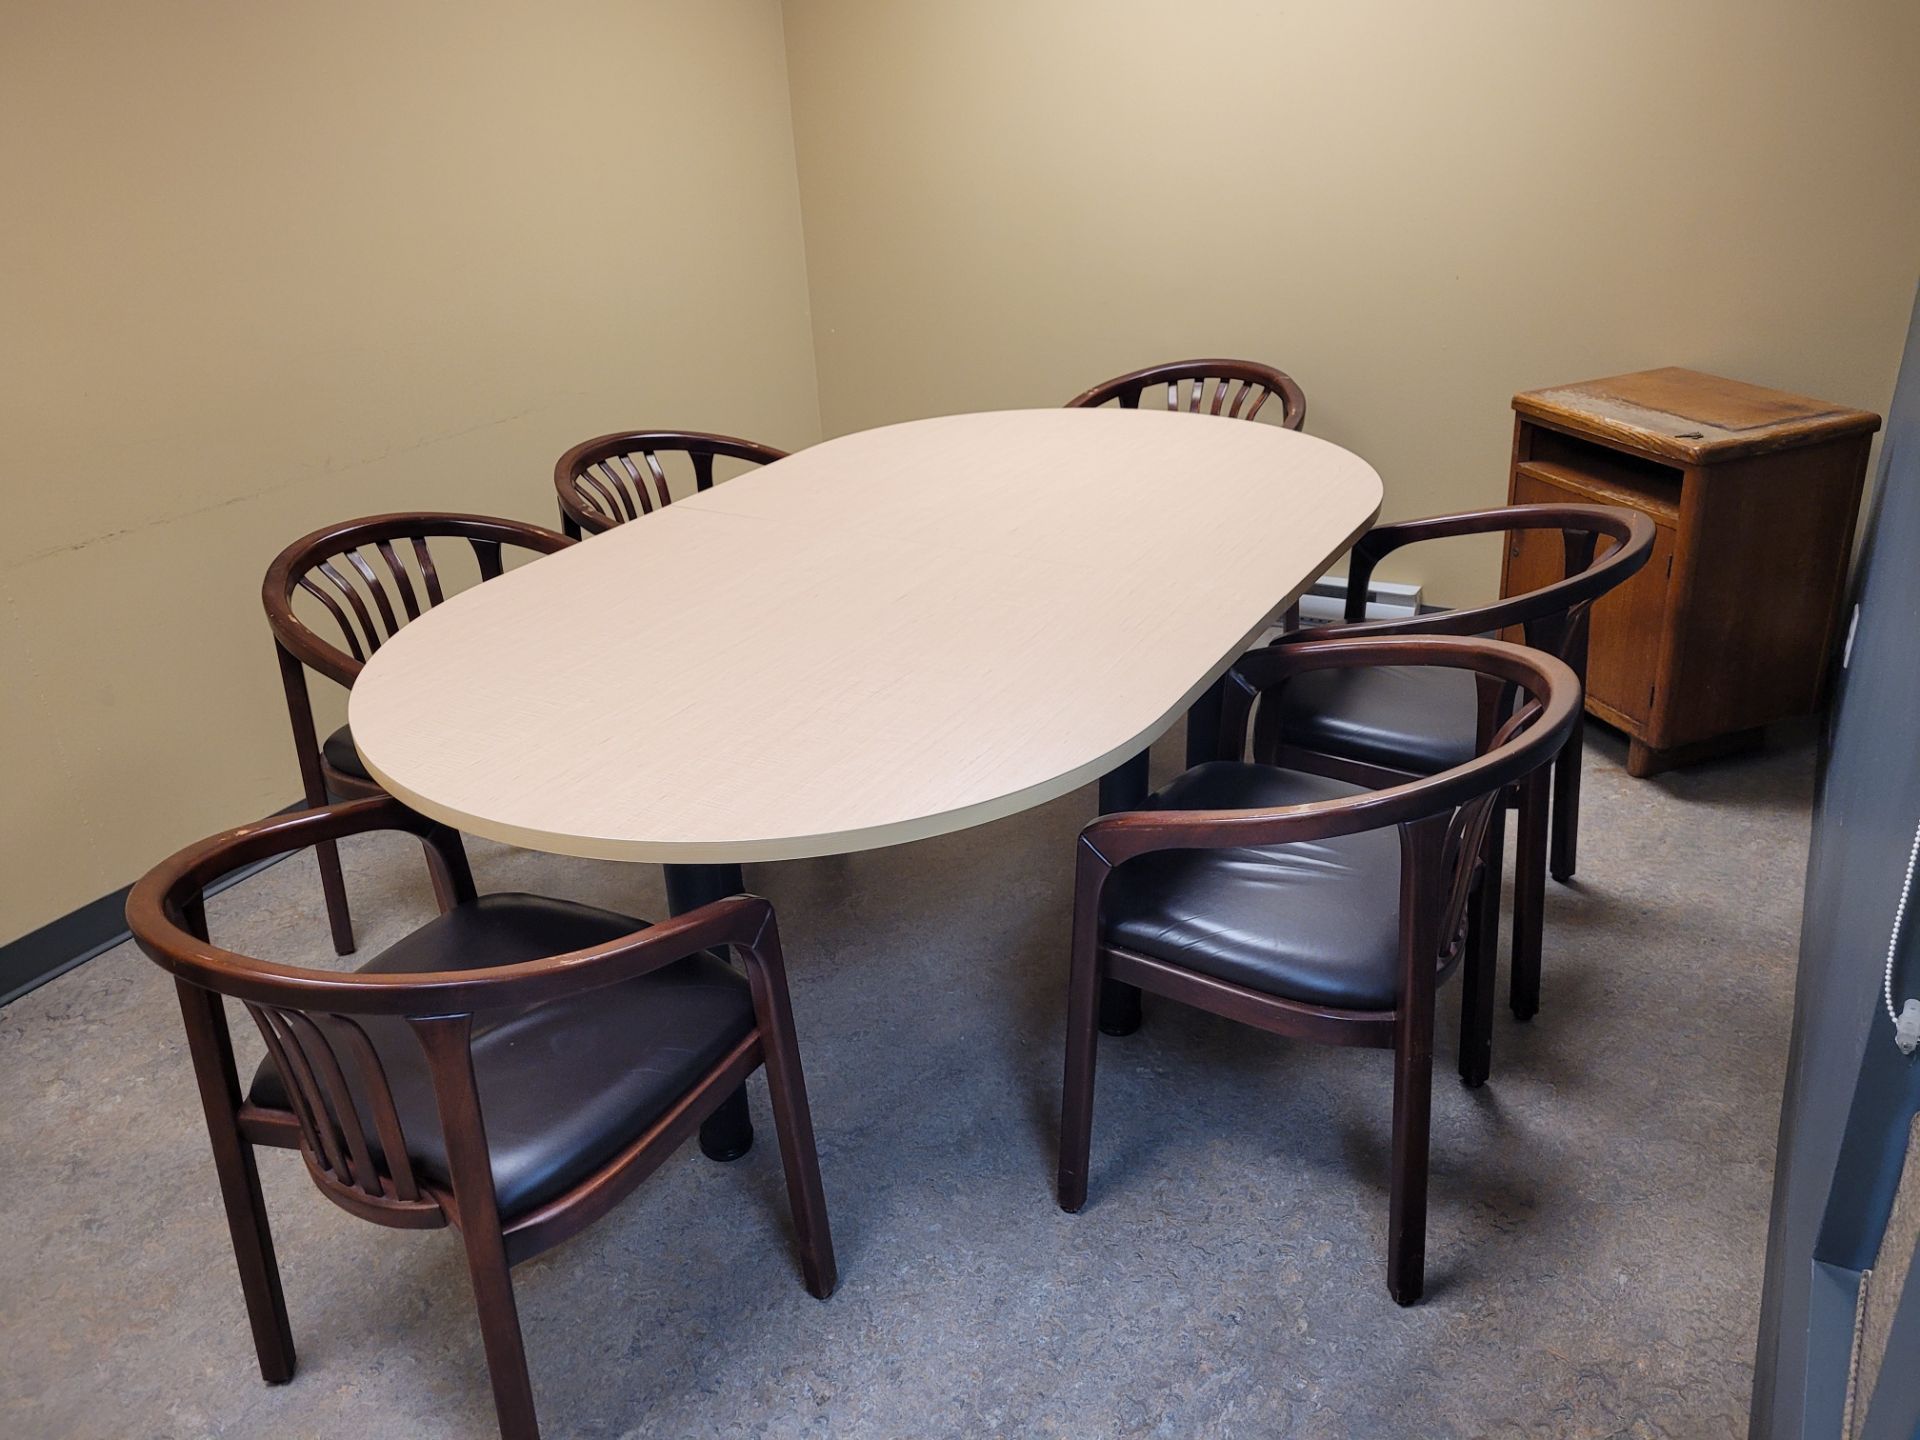 Lot of Conference Table and chairs, desk, projector screen (LOCATED IN SAINT-LAMBERT, QC)